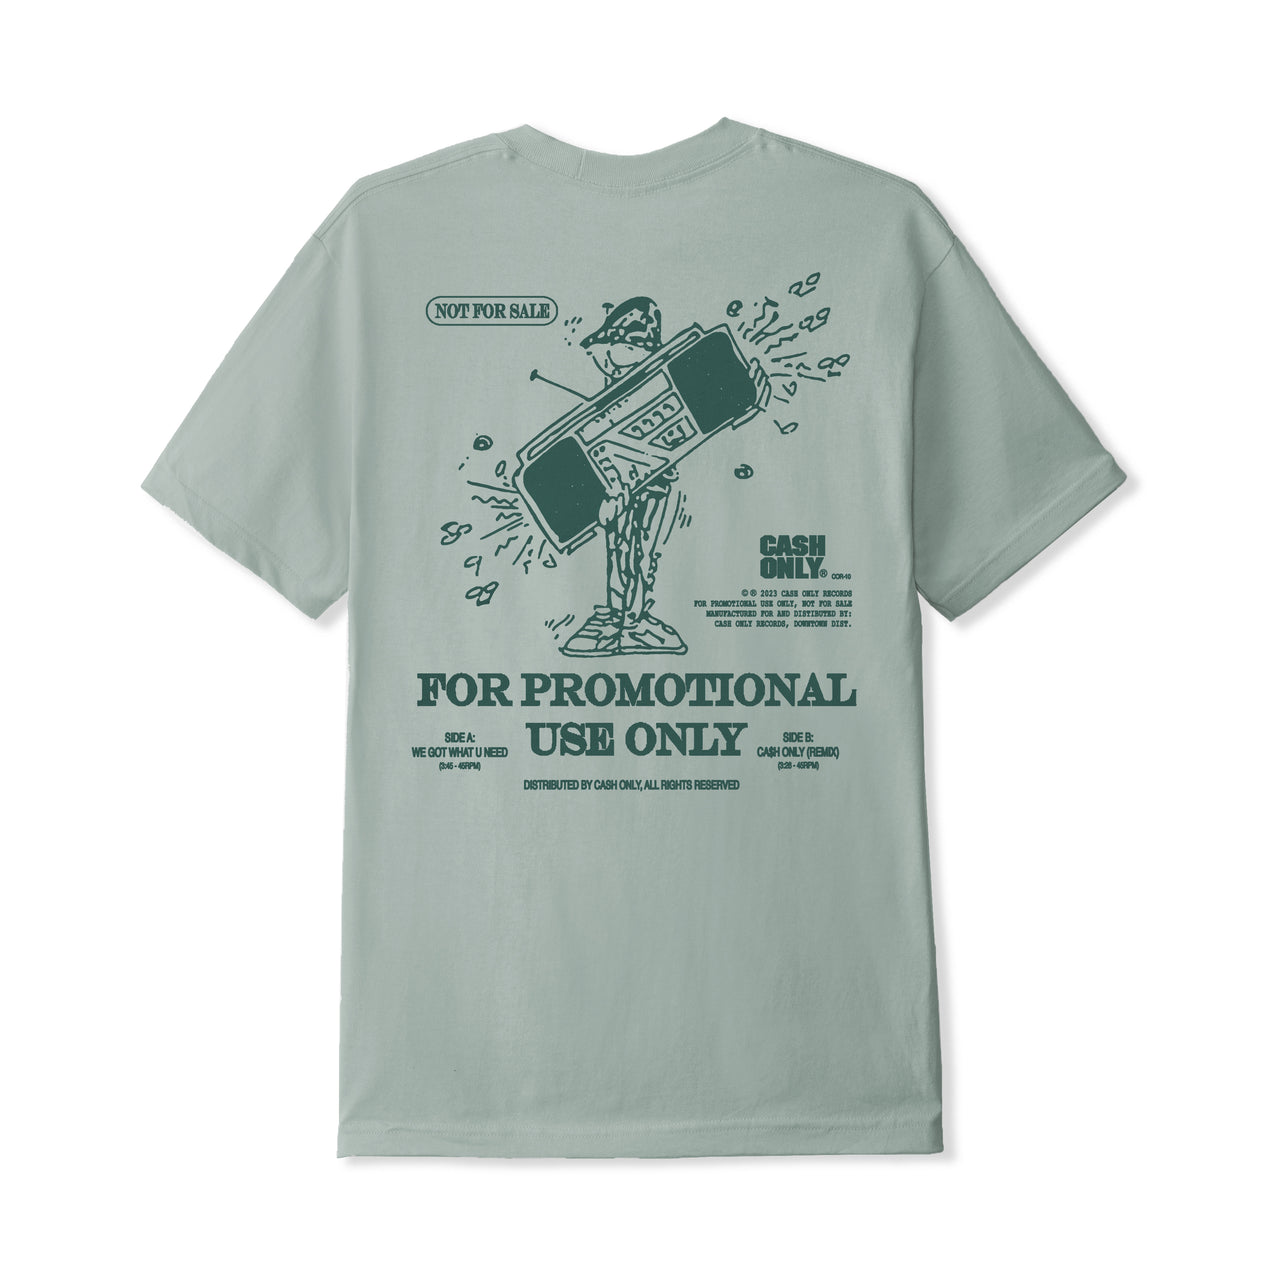 CASH ONLY - PROMOTIONAL USE TEE - DOVE